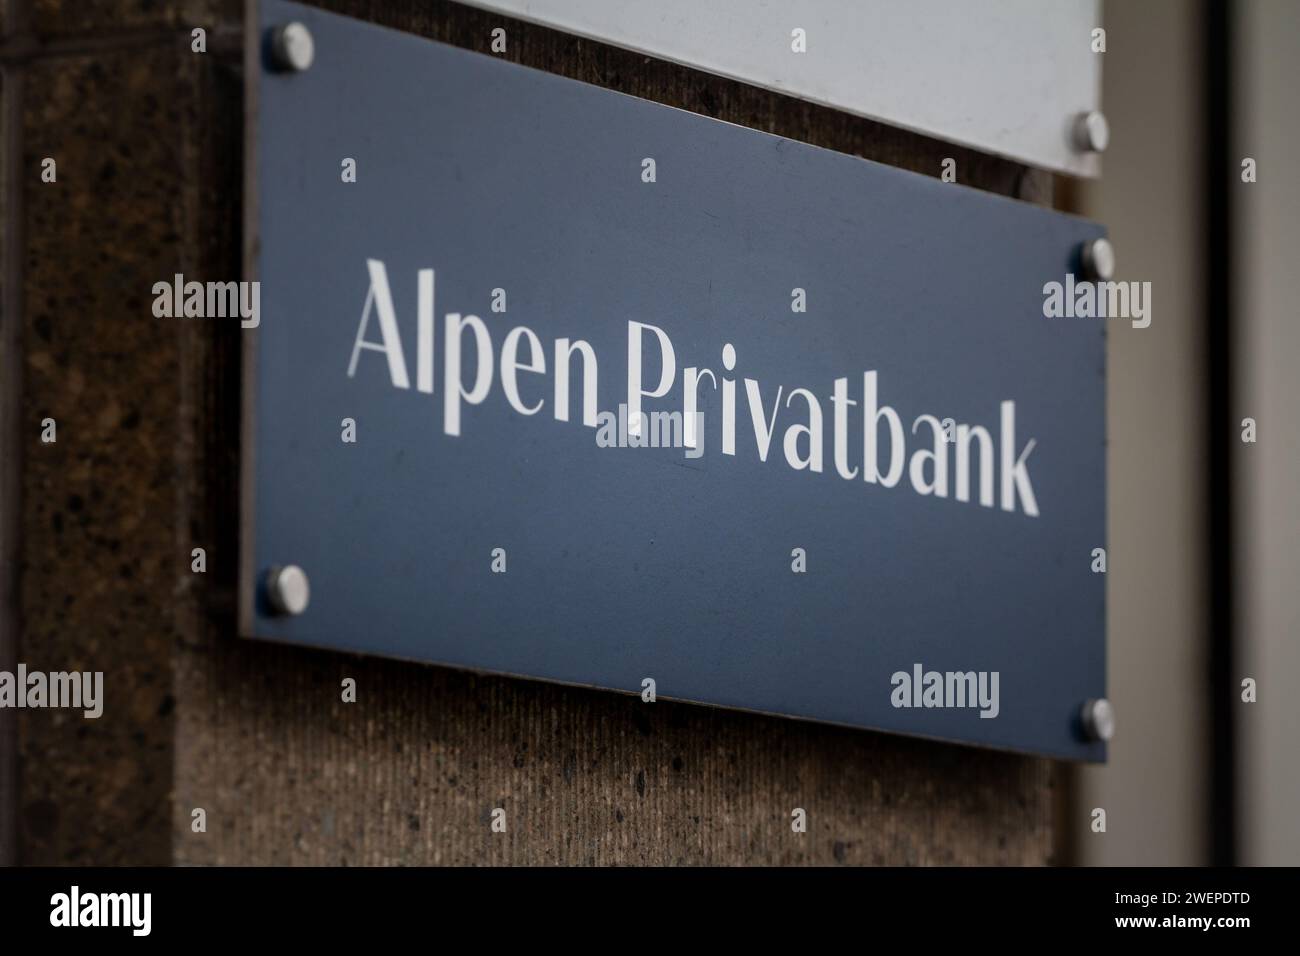 Picture of a sign with the logo of Alpen Privatbank bank on their local office in Dusseldorf, Germany. Alpen Privatbank is a private bank in western A Stock Photo